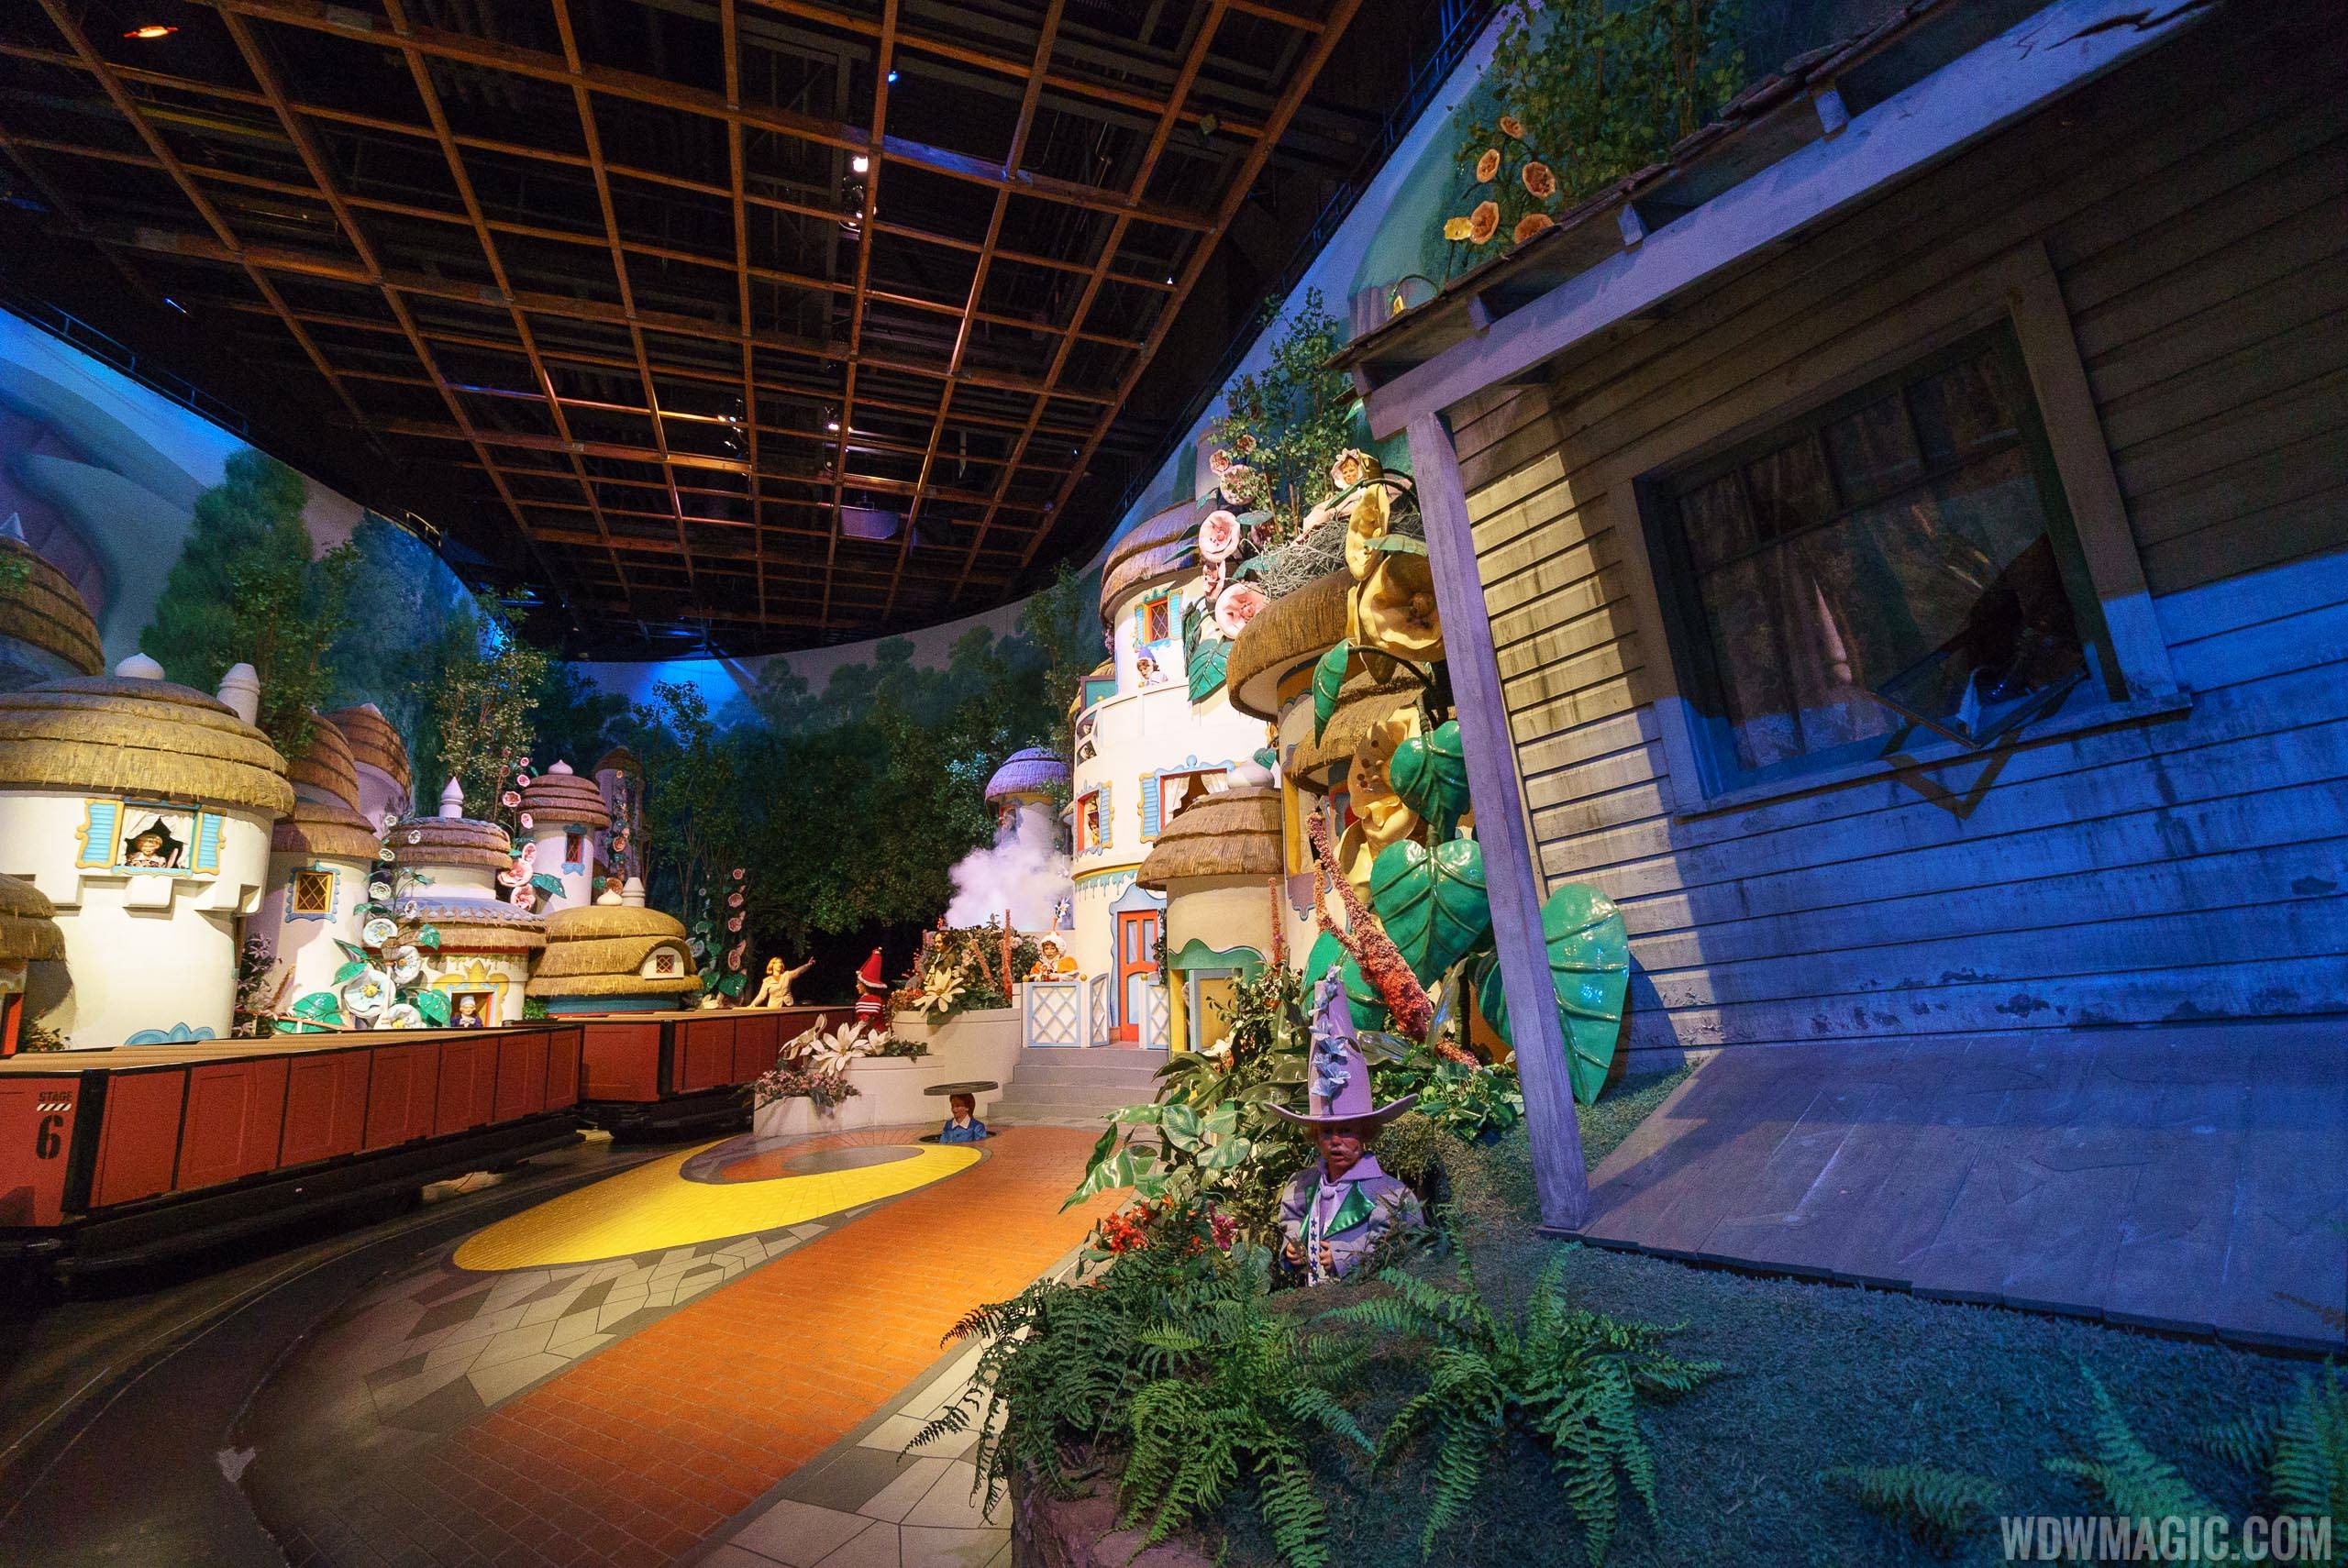 The Great Movie Ride - The Wizard of Oz